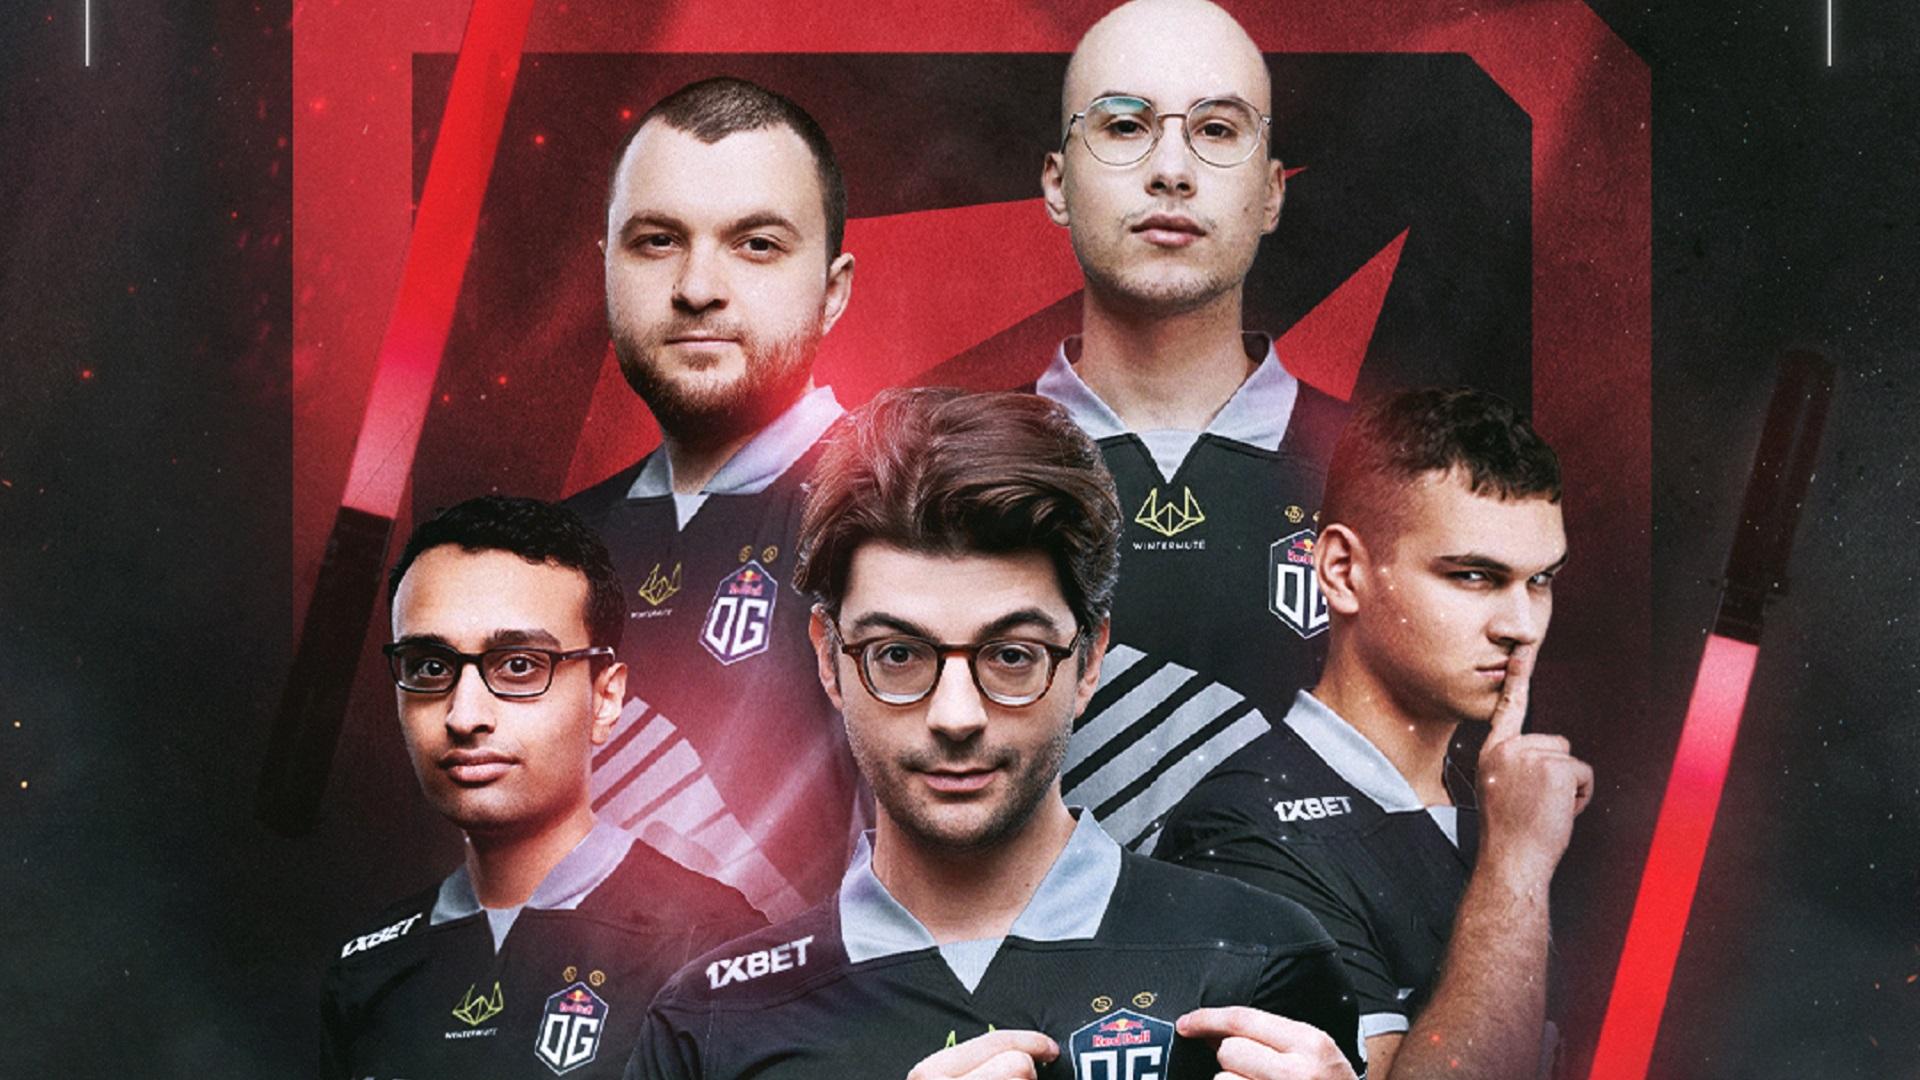 cover art featuring OG's Dota 2 roster for the upcoming DreamLeague Season 21.